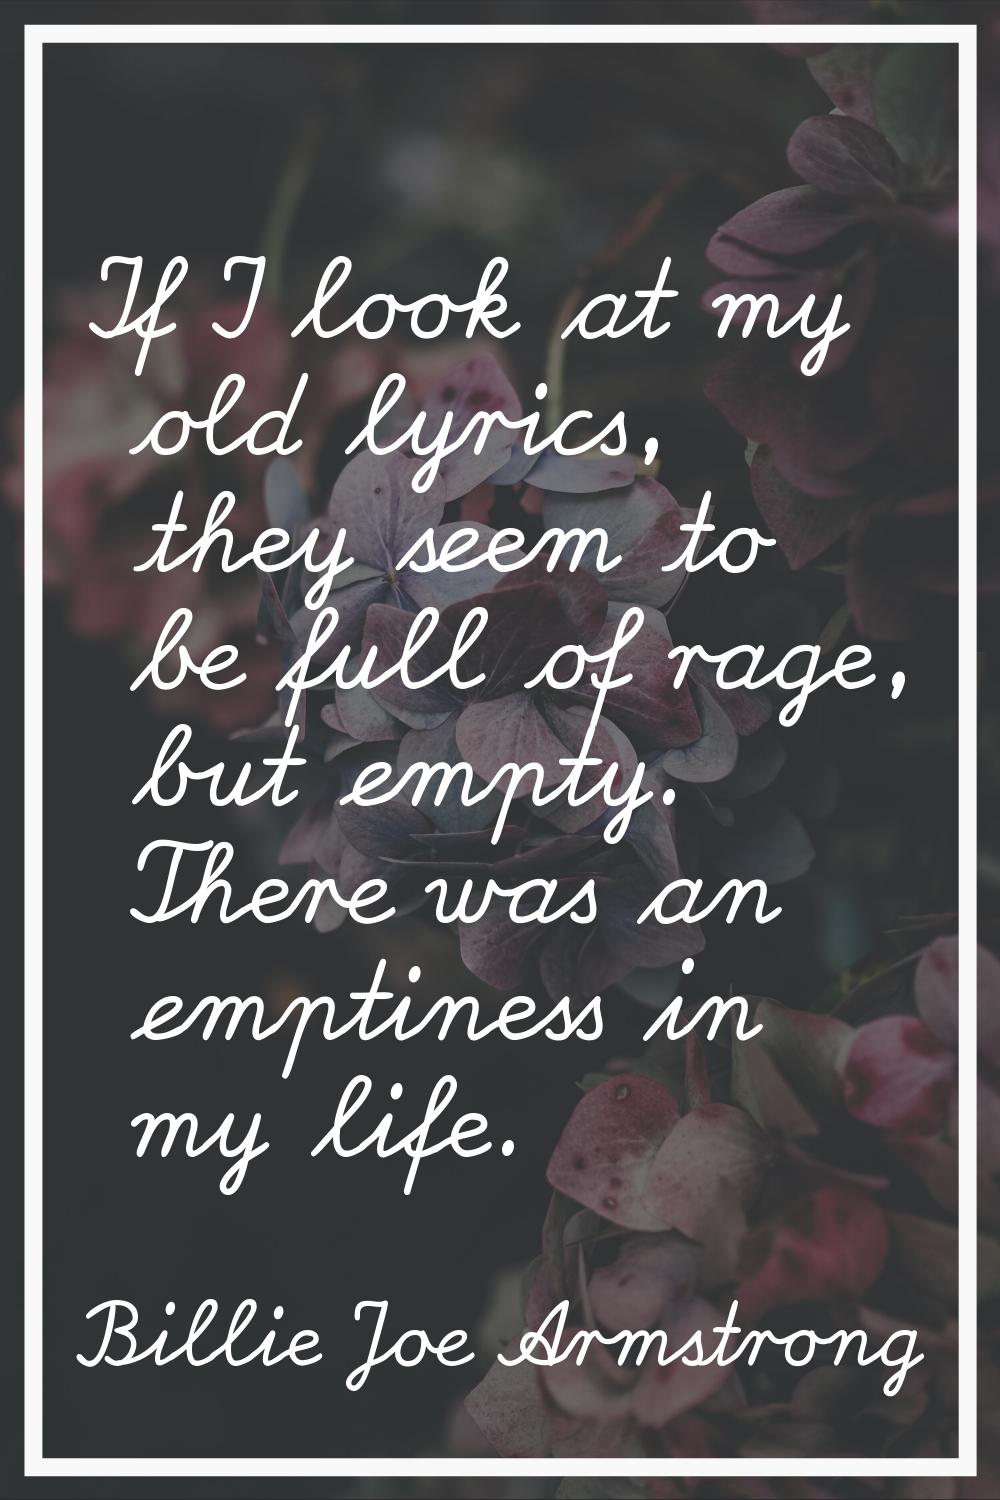 If I look at my old lyrics, they seem to be full of rage, but empty. There was an emptiness in my l